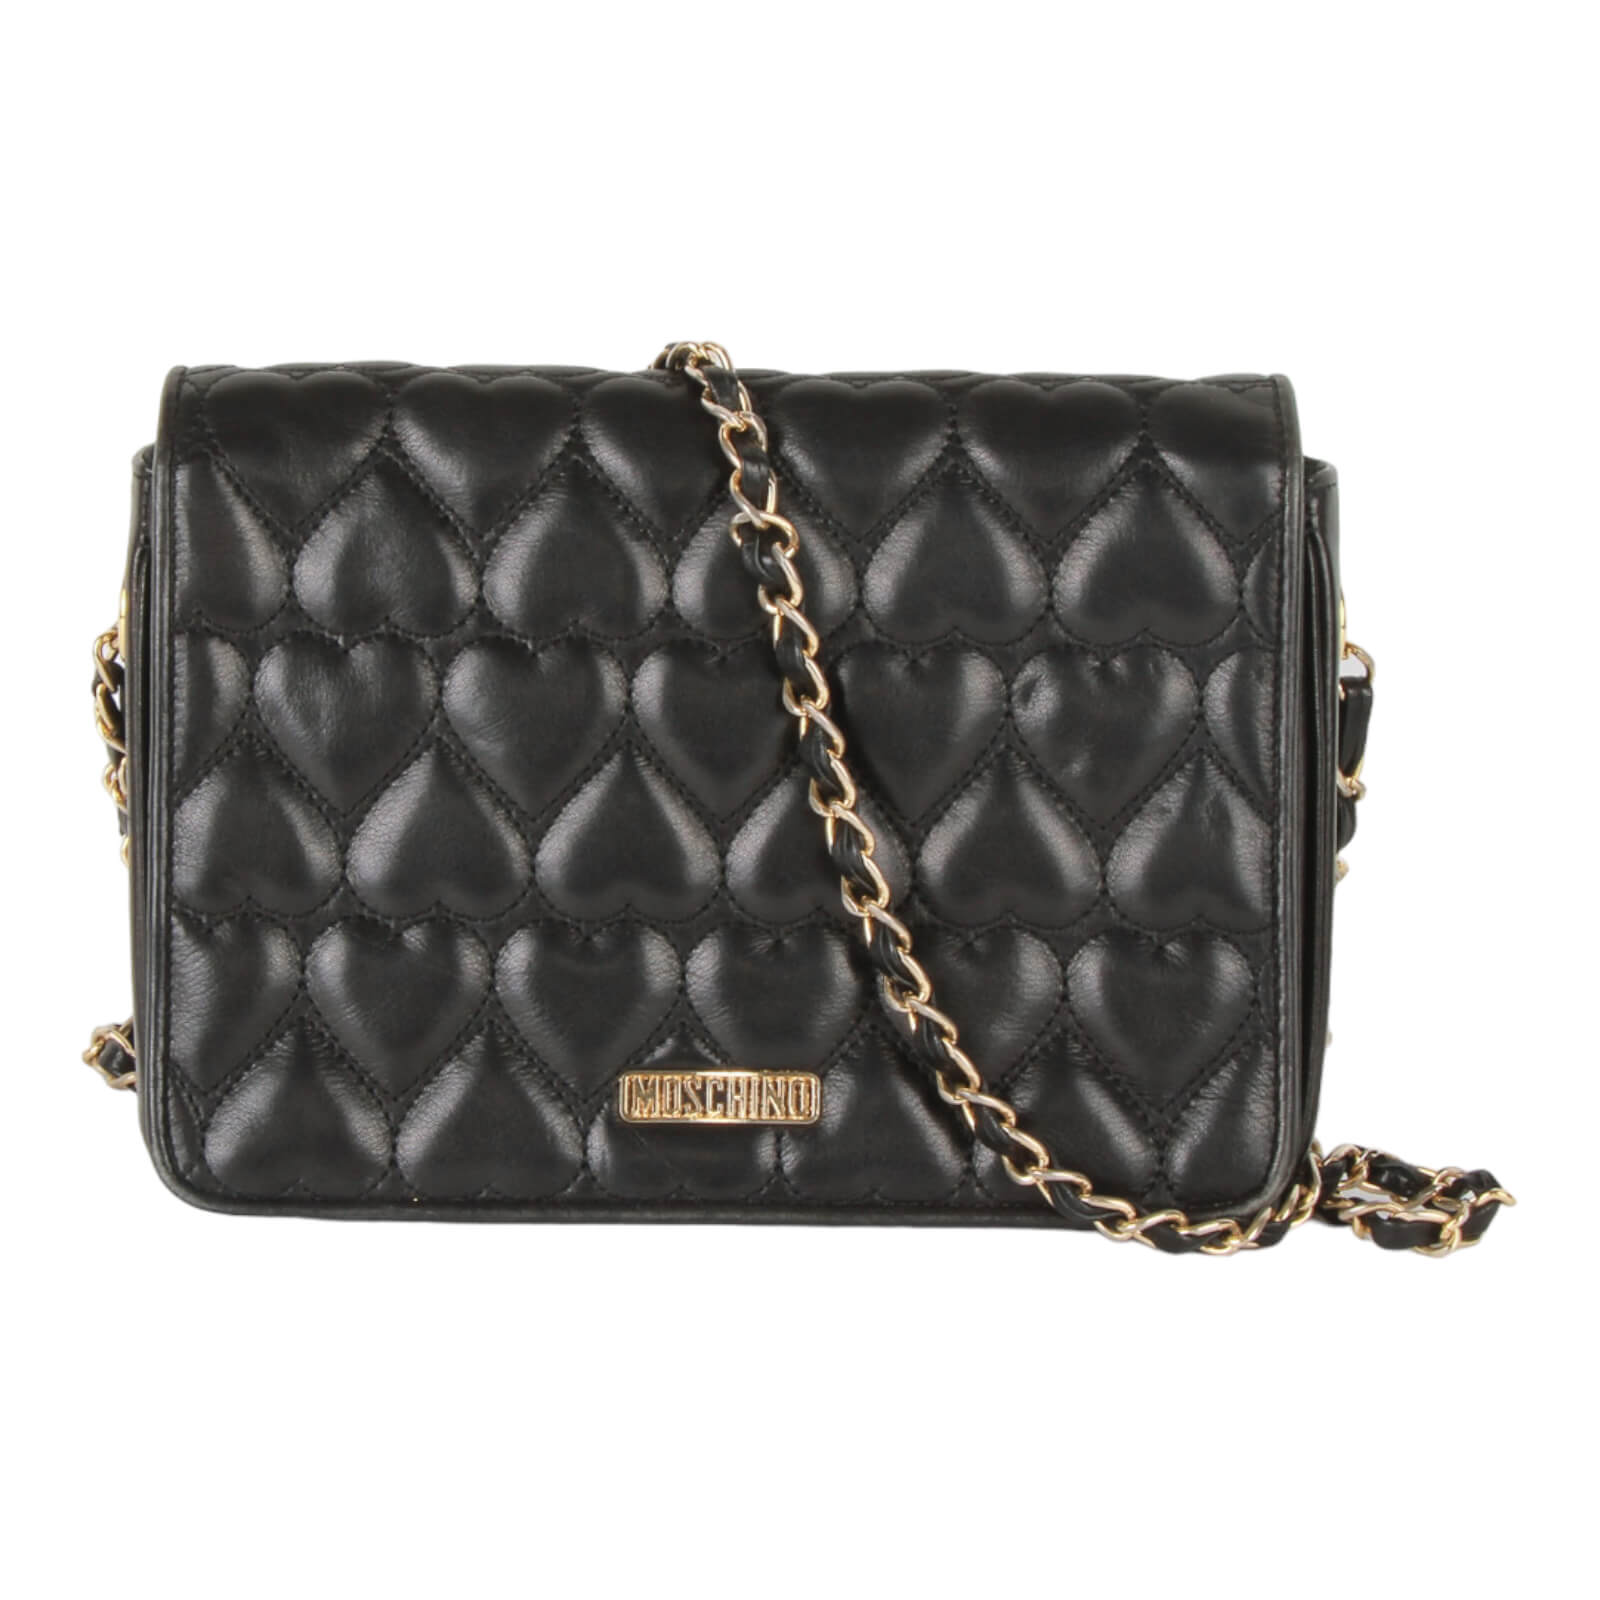 Vintage Moschino heart shape quilted calfskin gold chain strap